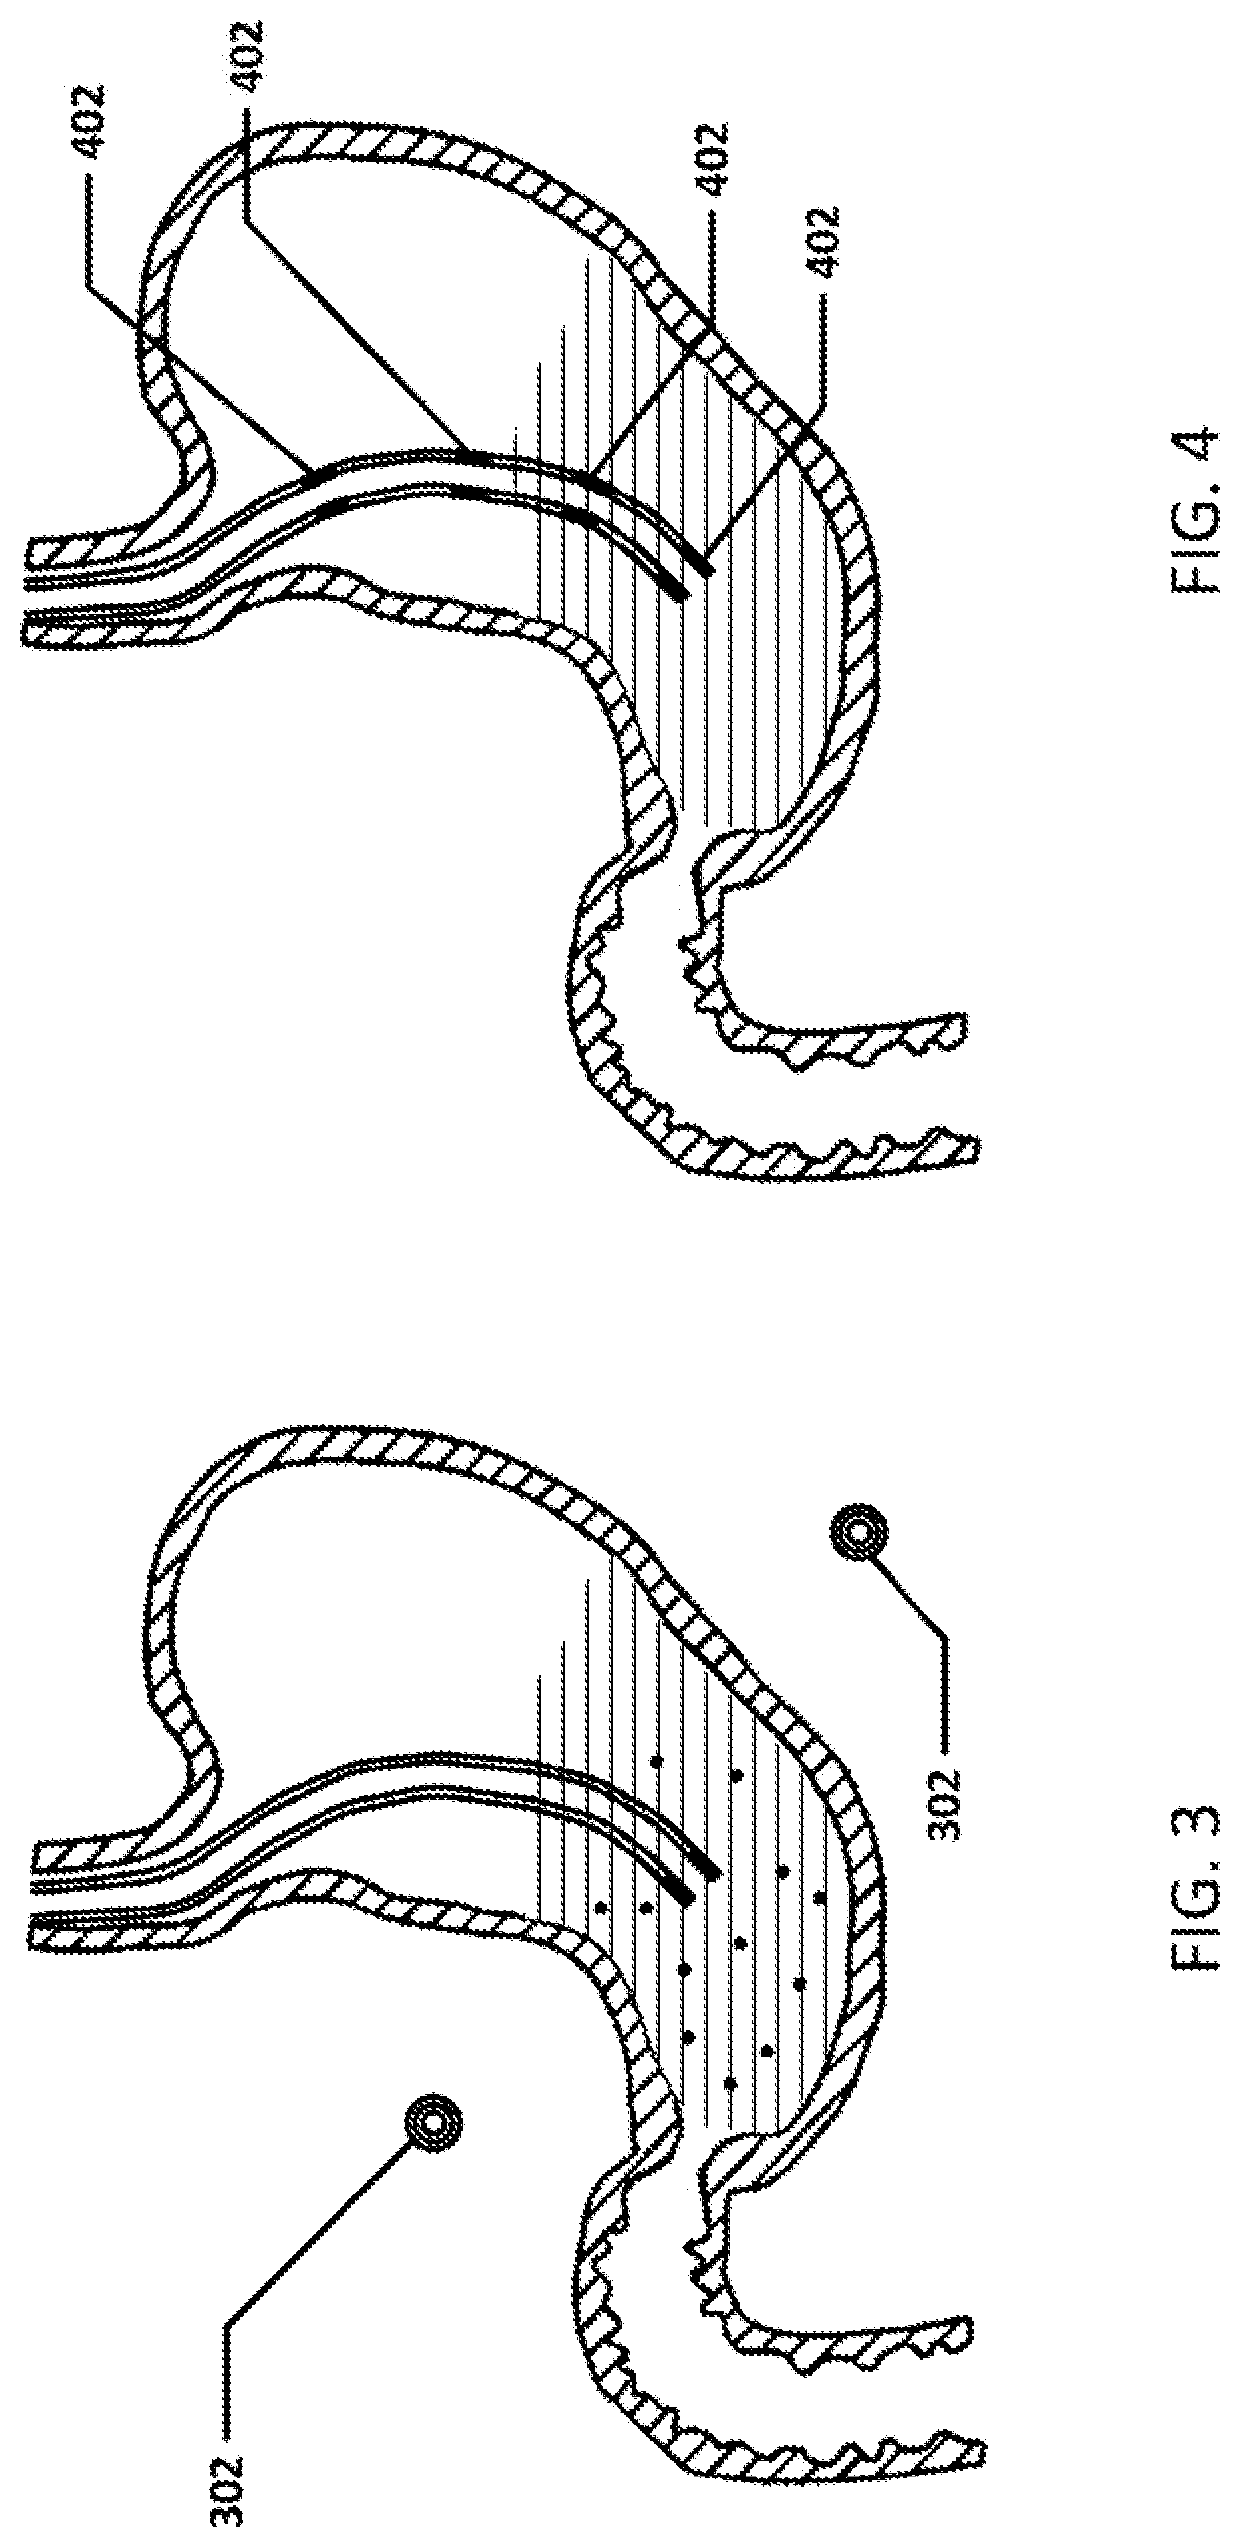 Devices and methods to measure gastric residual volume